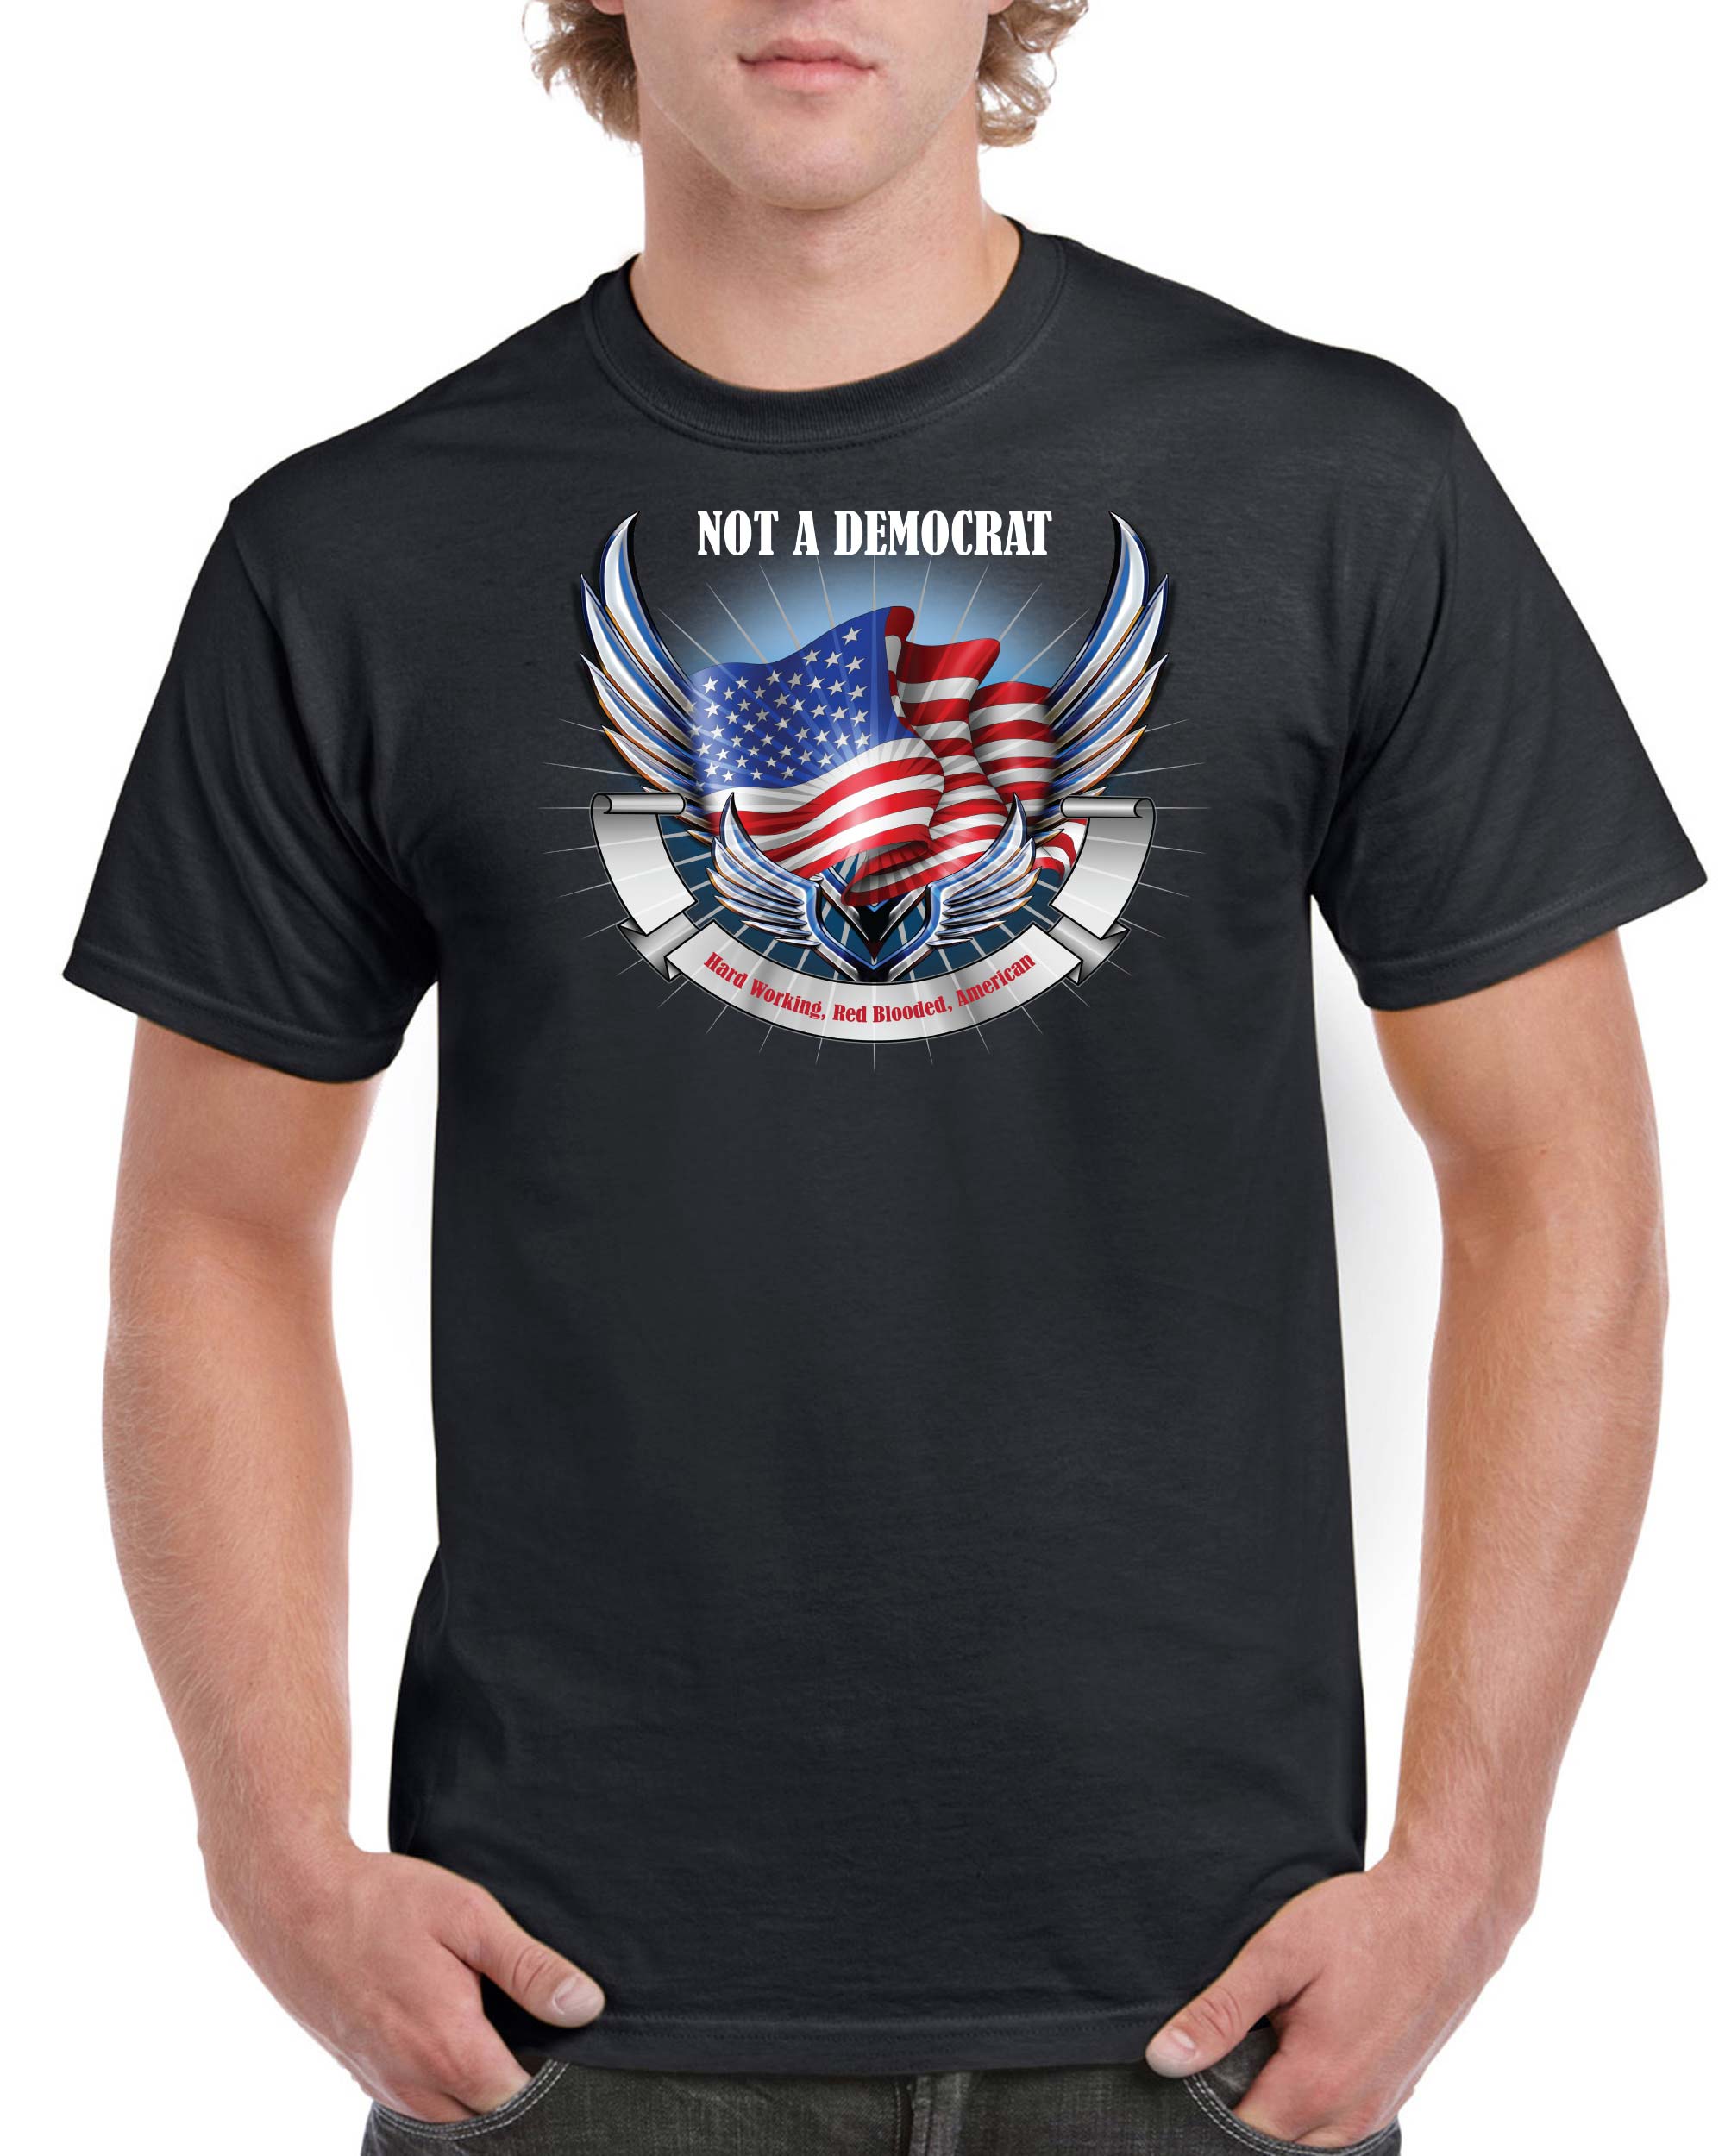 Not a Democrat: Hard Working Red Blooded American T-Shirt P-154 – DOMAGRON